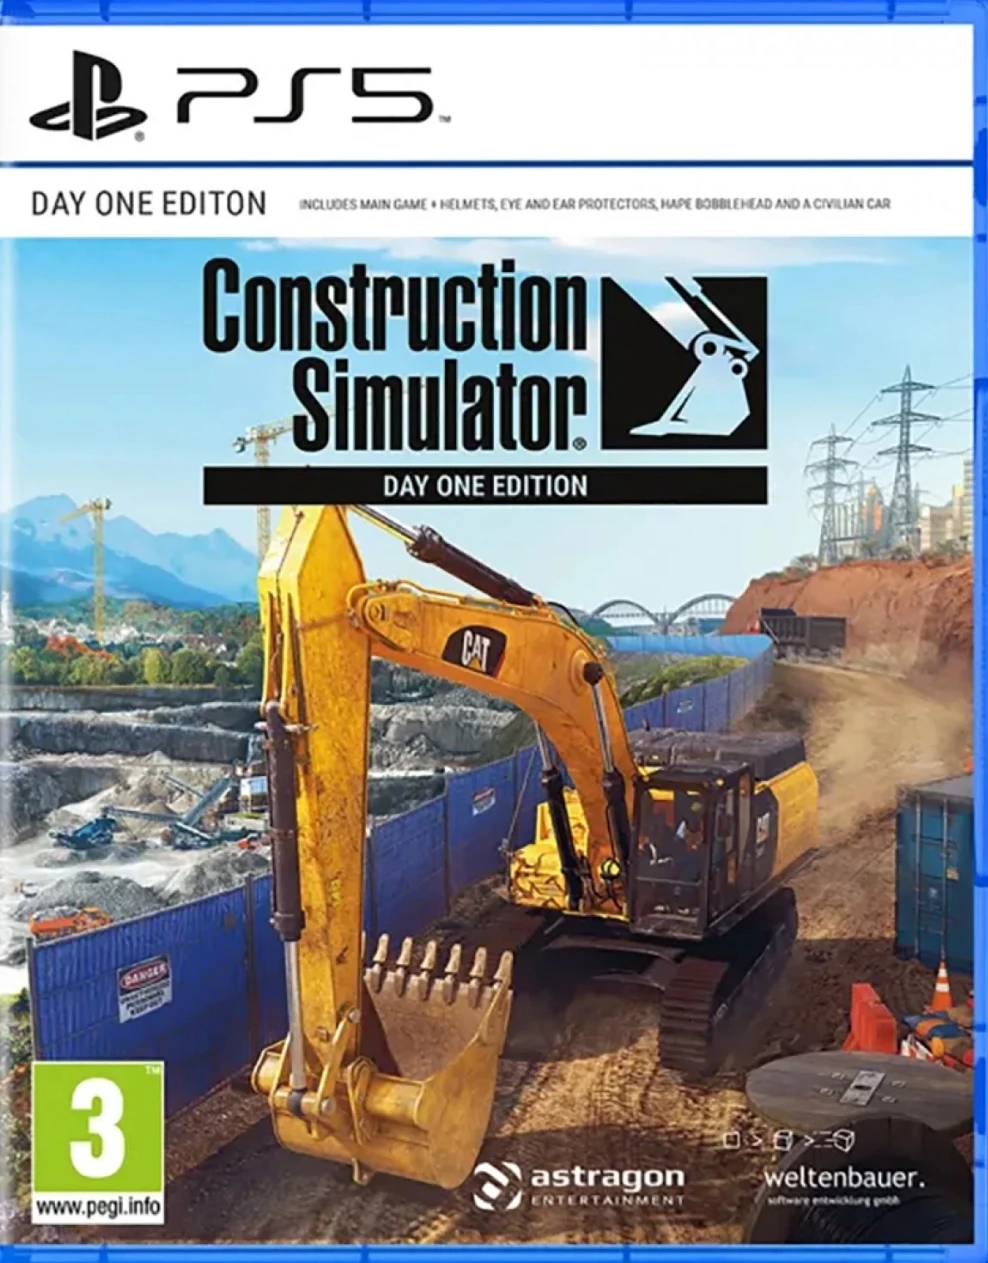 Construction Simulator - Day One Edition (PS5), Astragon